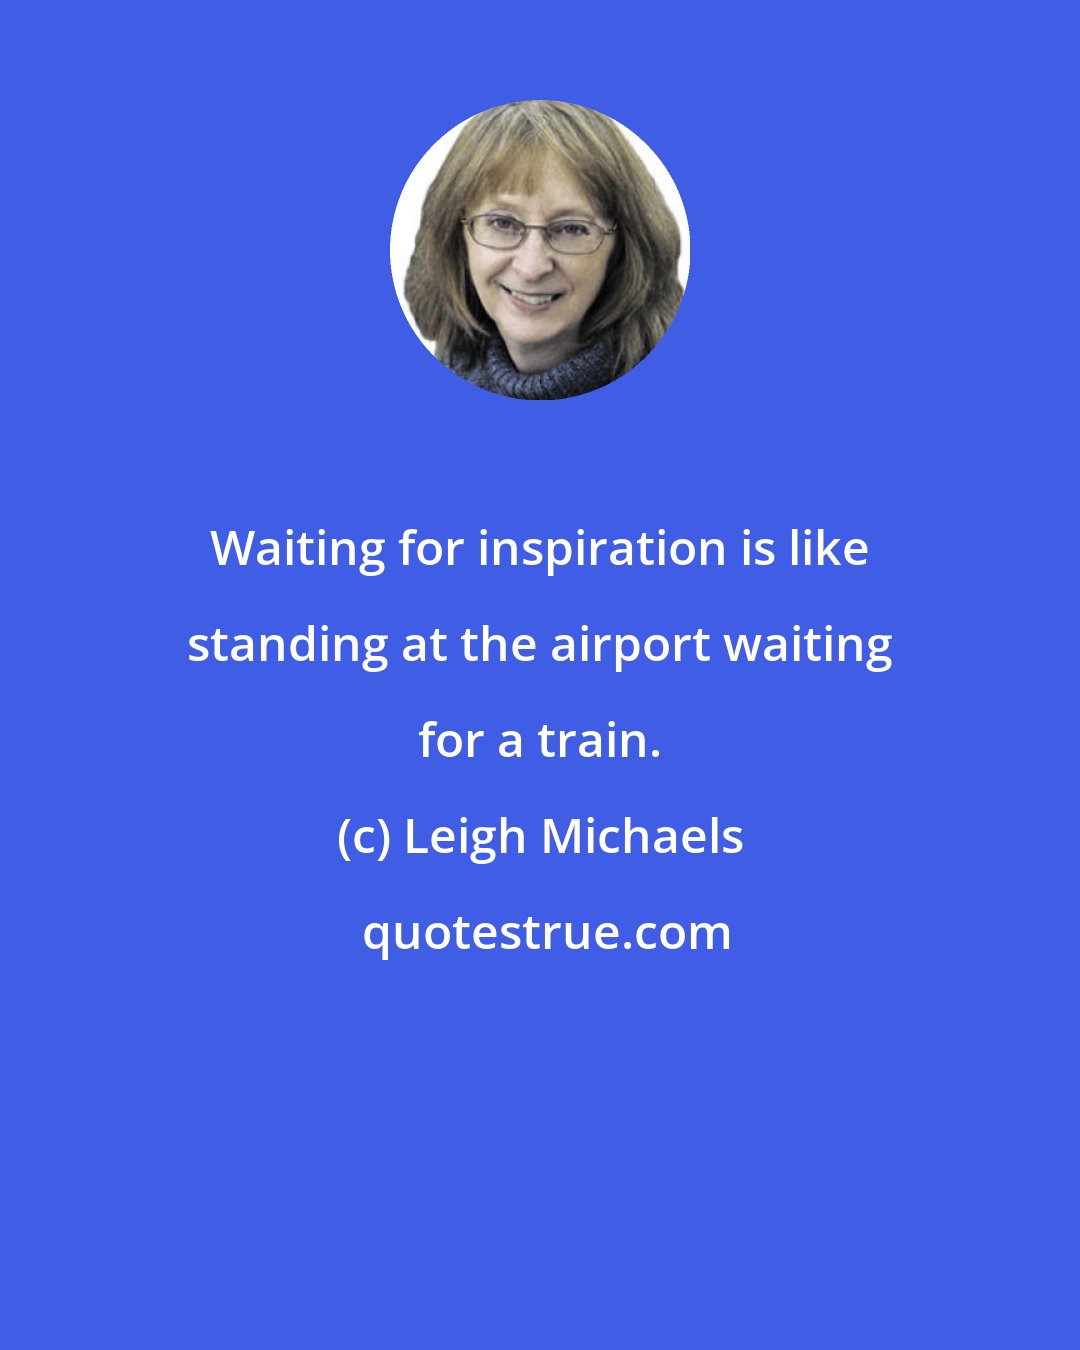 Leigh Michaels: Waiting for inspiration is like standing at the airport waiting for a train.